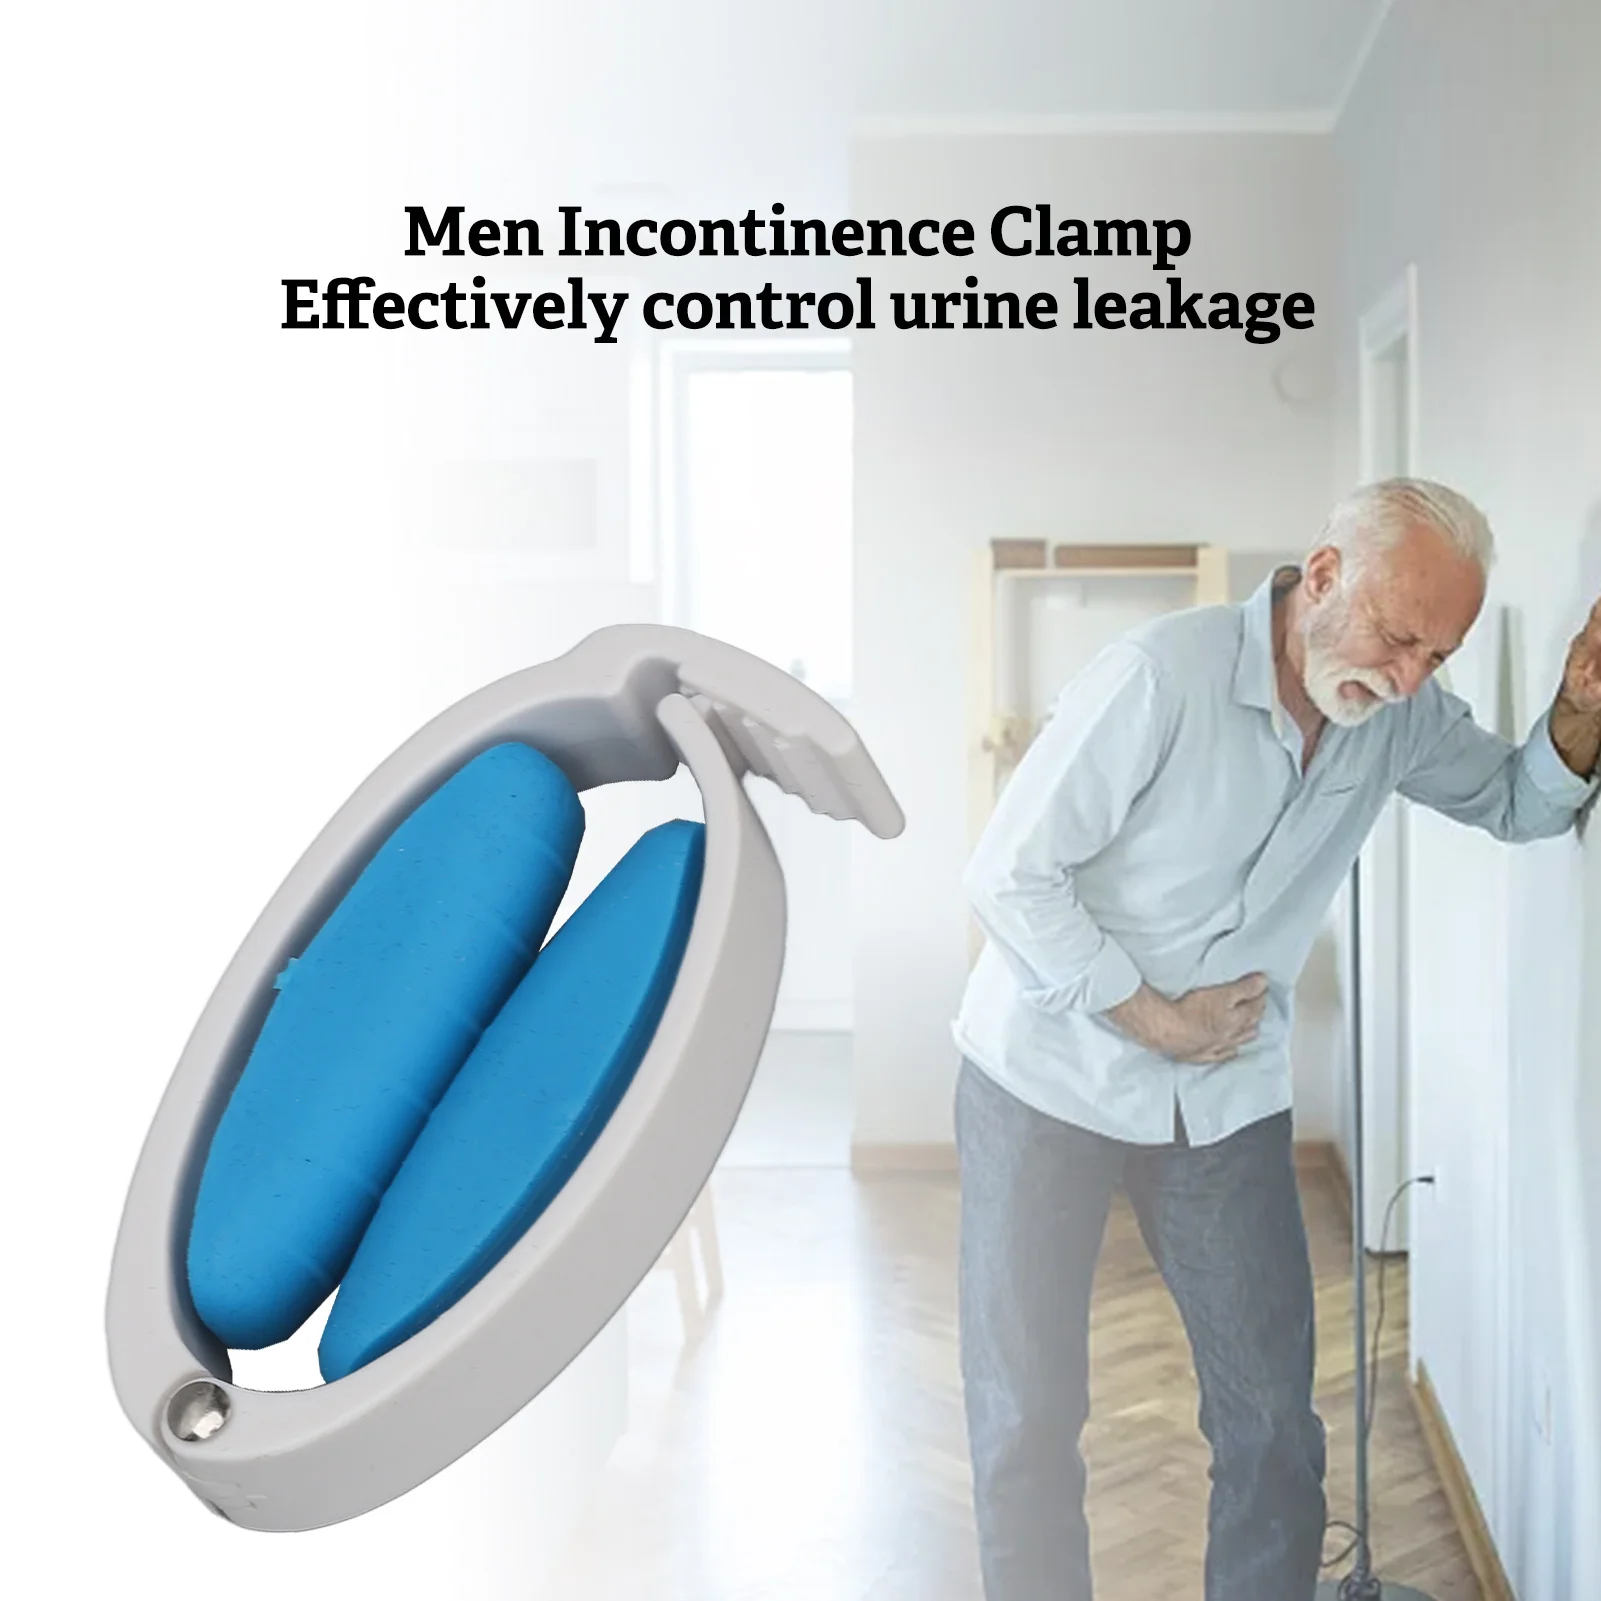 Male Urinary Incontinence Clamp Prevent Leakage Adjust Pressure Soft Silicone Incontinence Clip for Men Male Patients Care